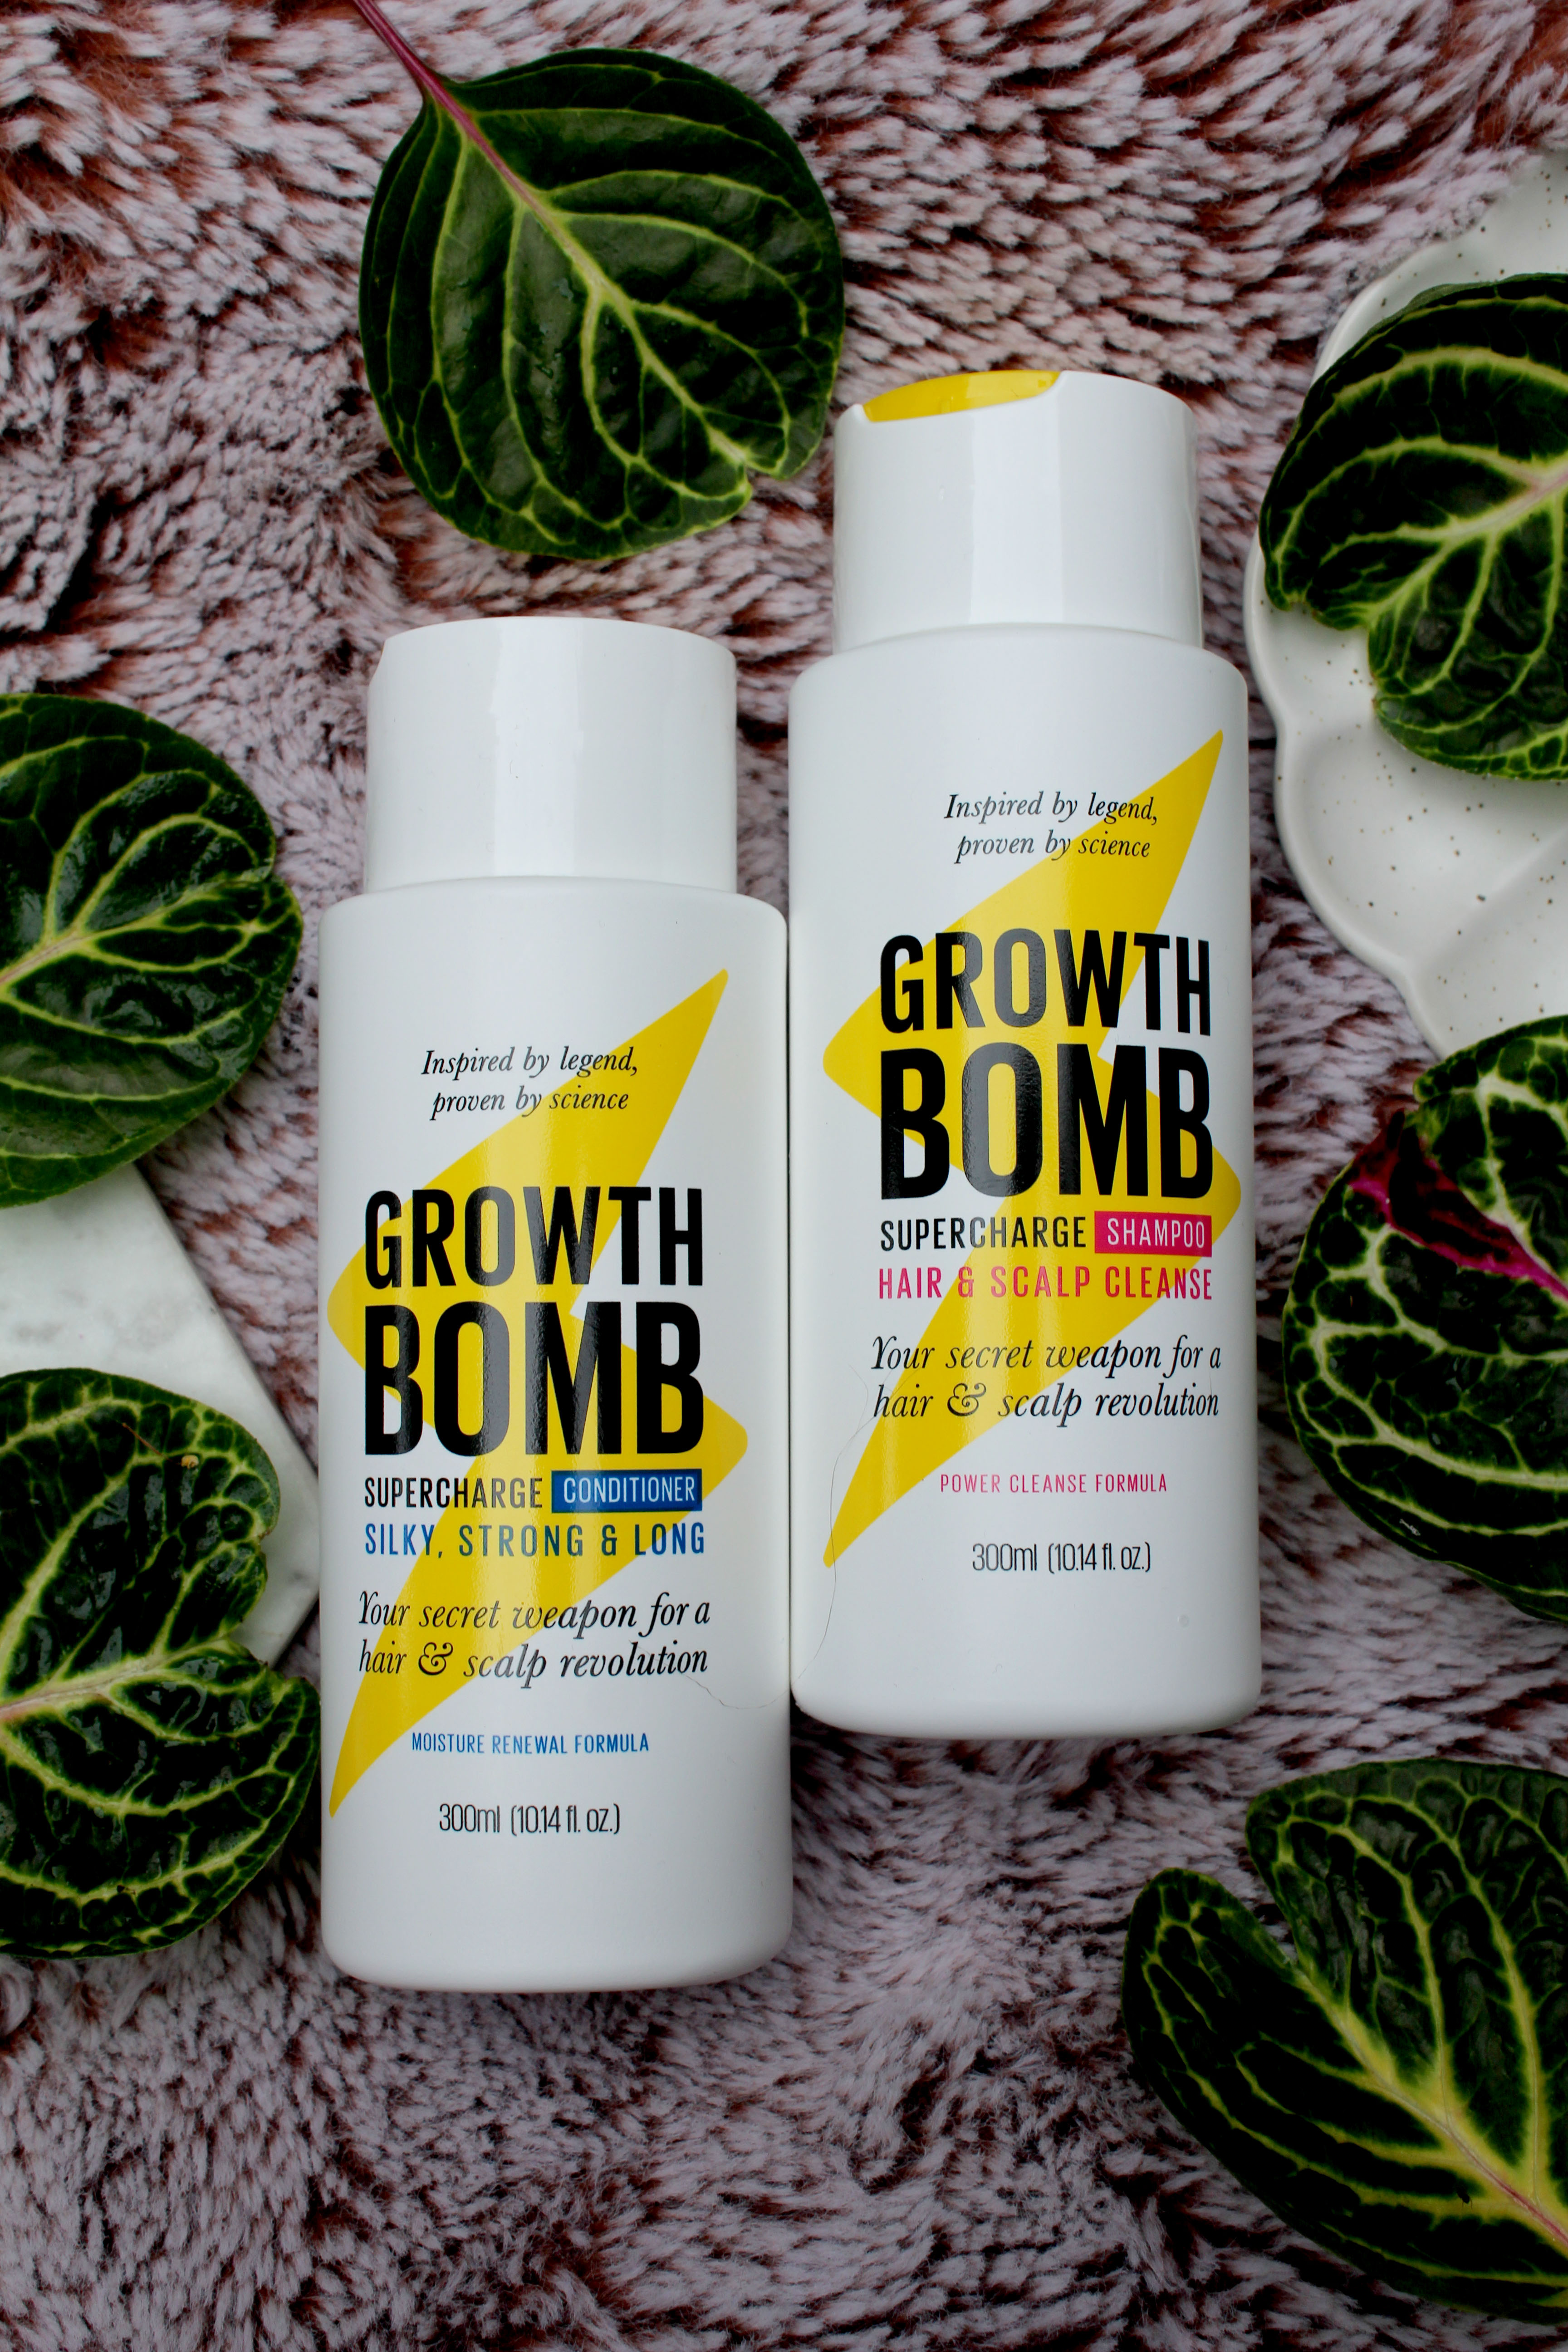 Review: Growth Bomb Supercharge Shampoo and Conditioner